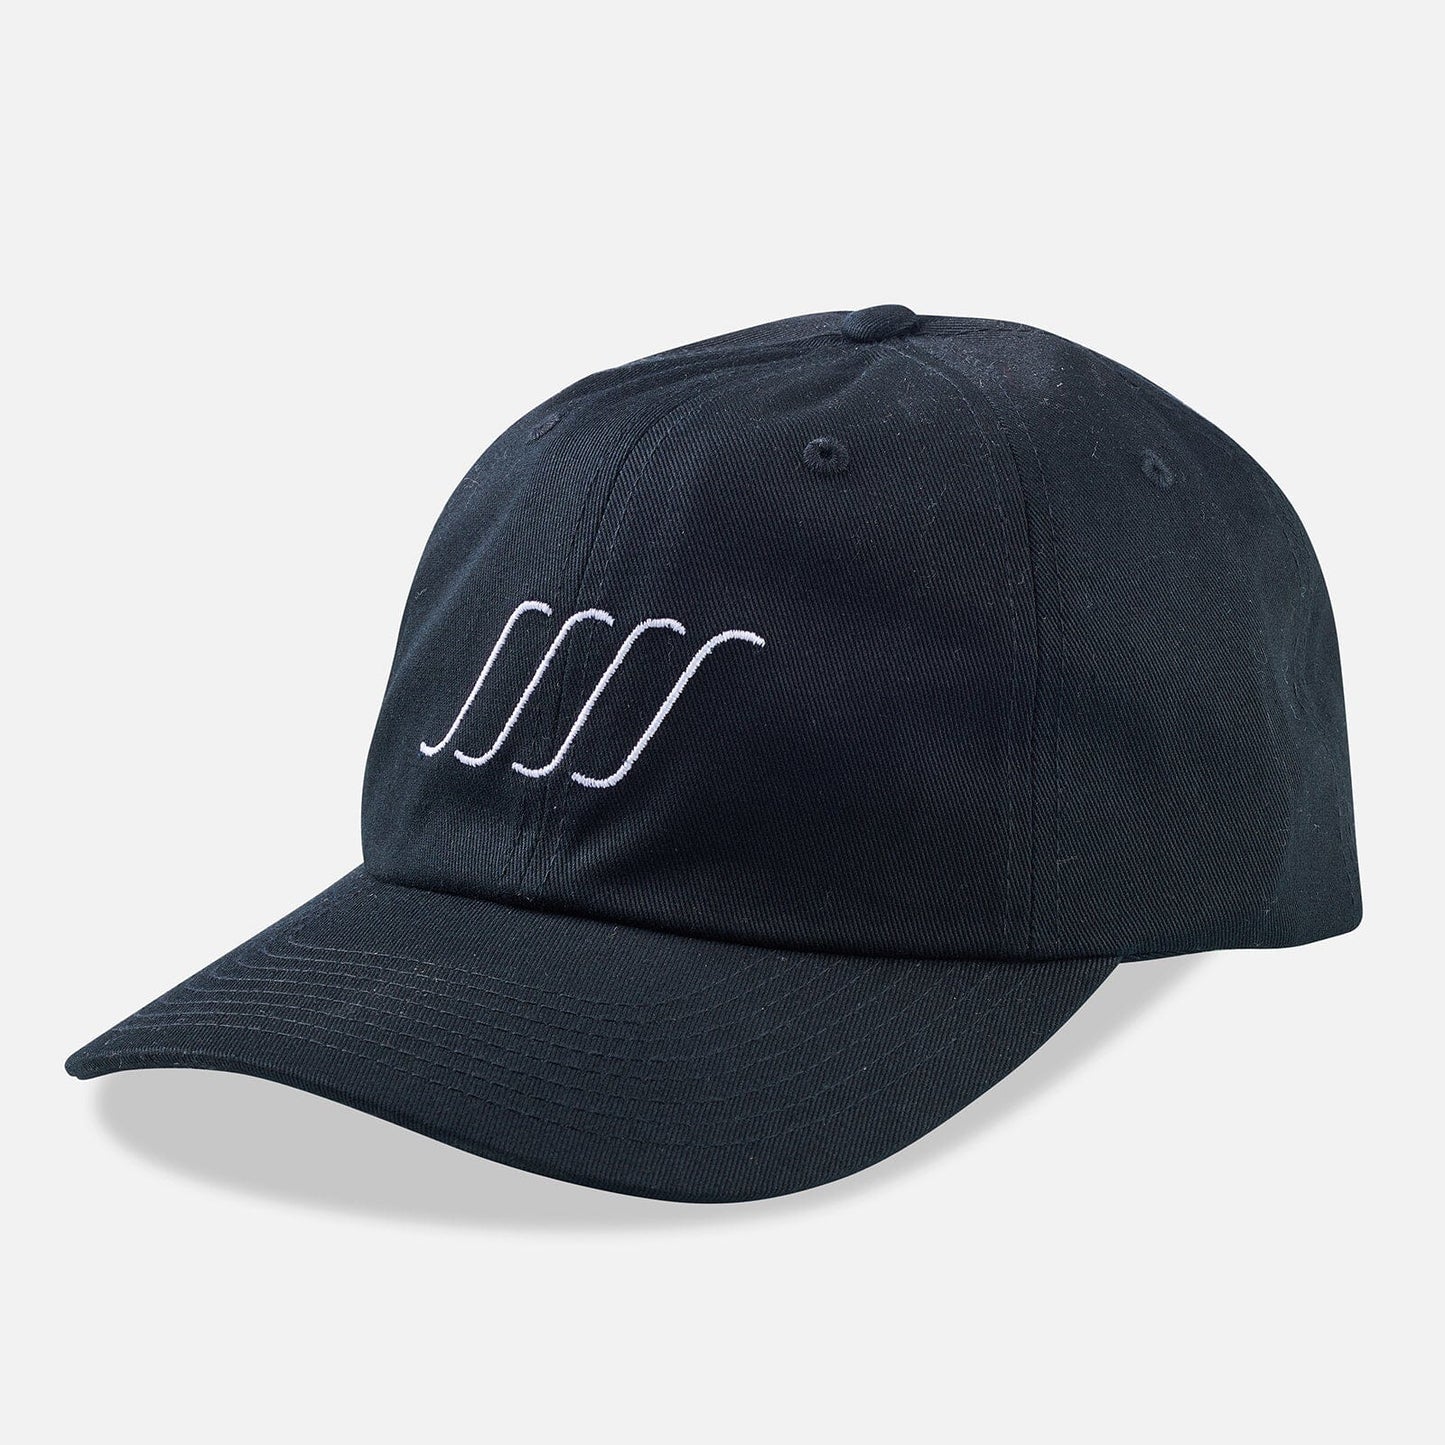 South Swell Embroidered Hat Hats SOUTH SWELL Black 